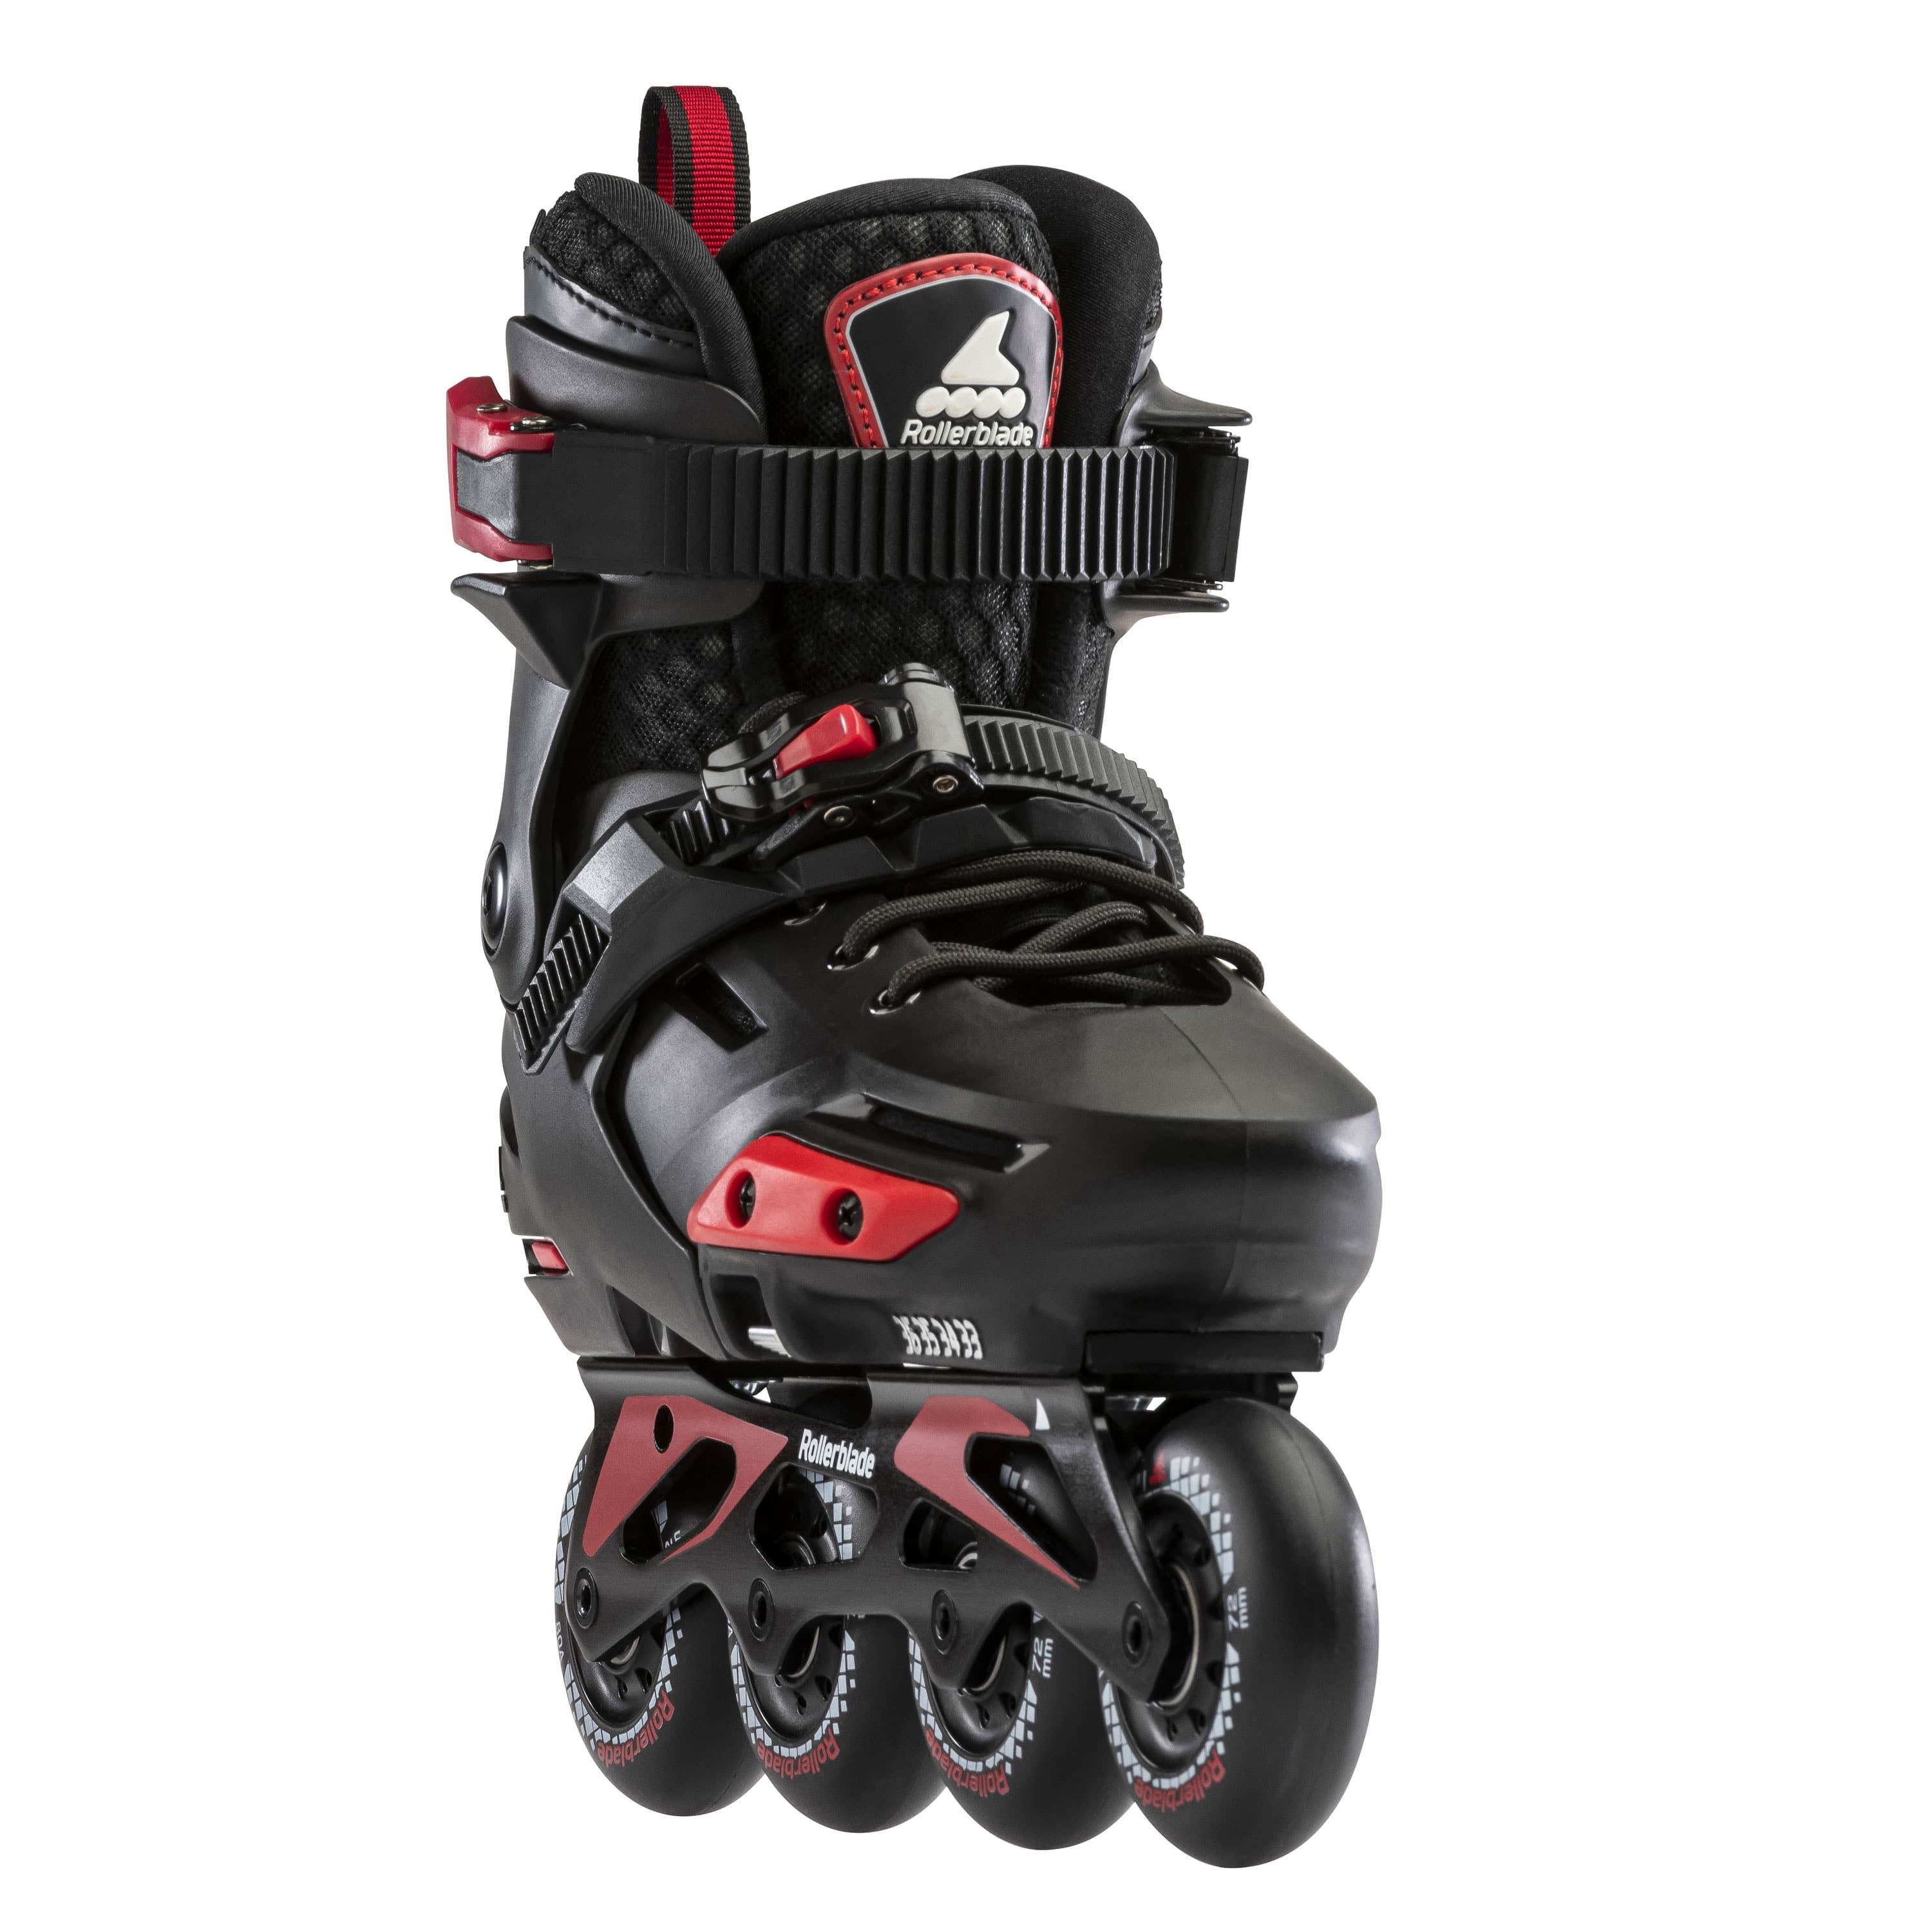 Apex Rollers Enfant Taille Modulable